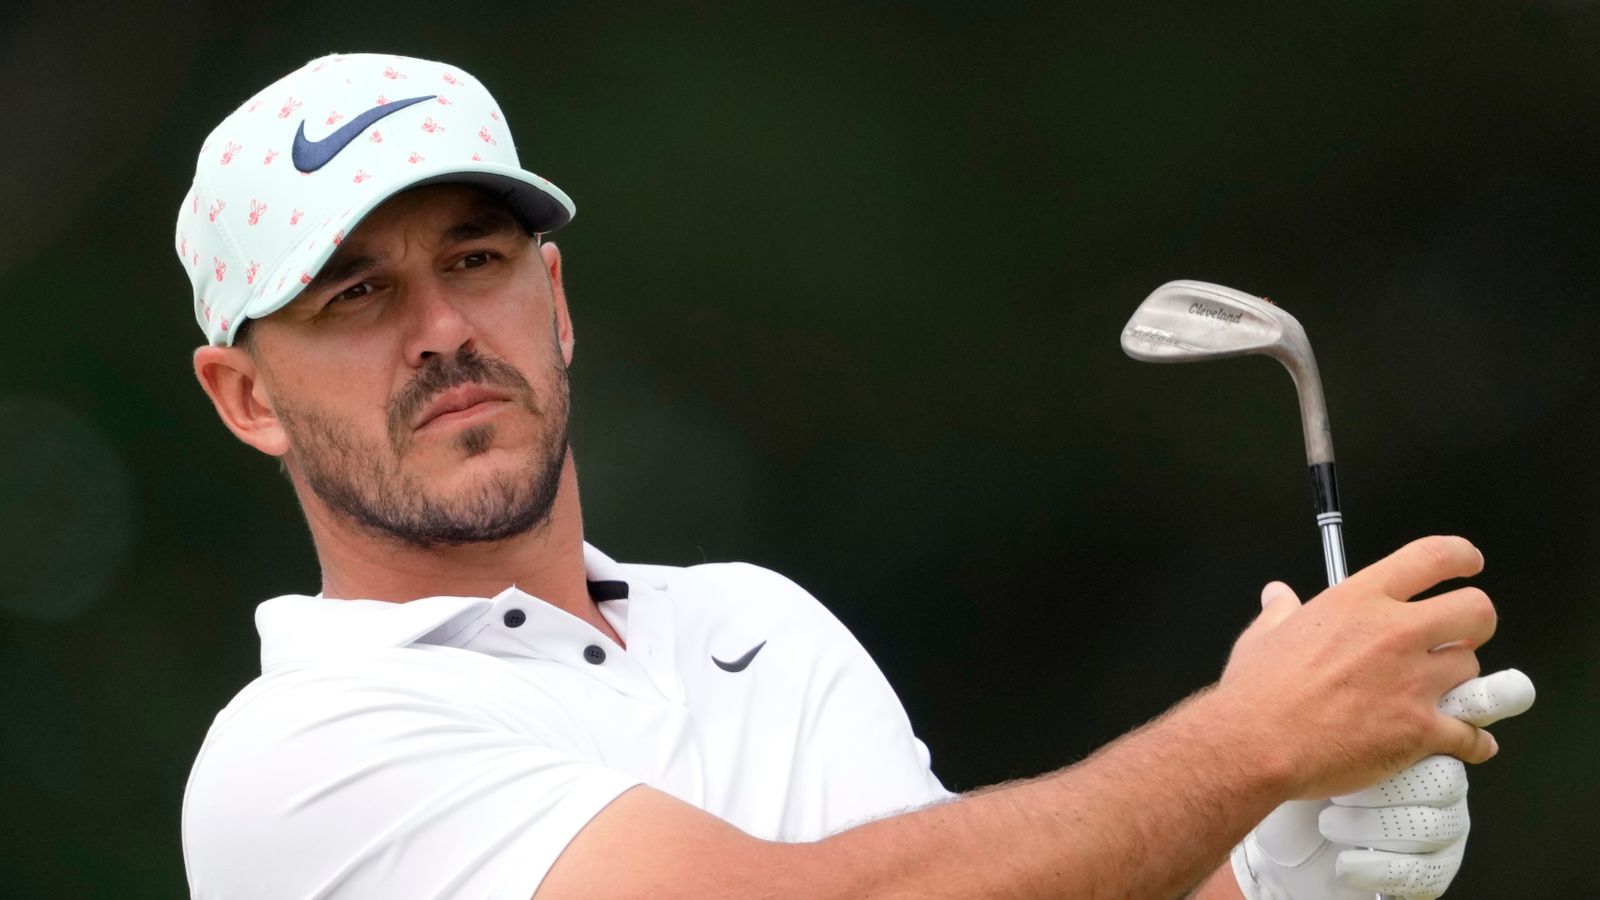 PGA Tour looks to revamp schedule as Brooks Koepka set to join LIV Golf series